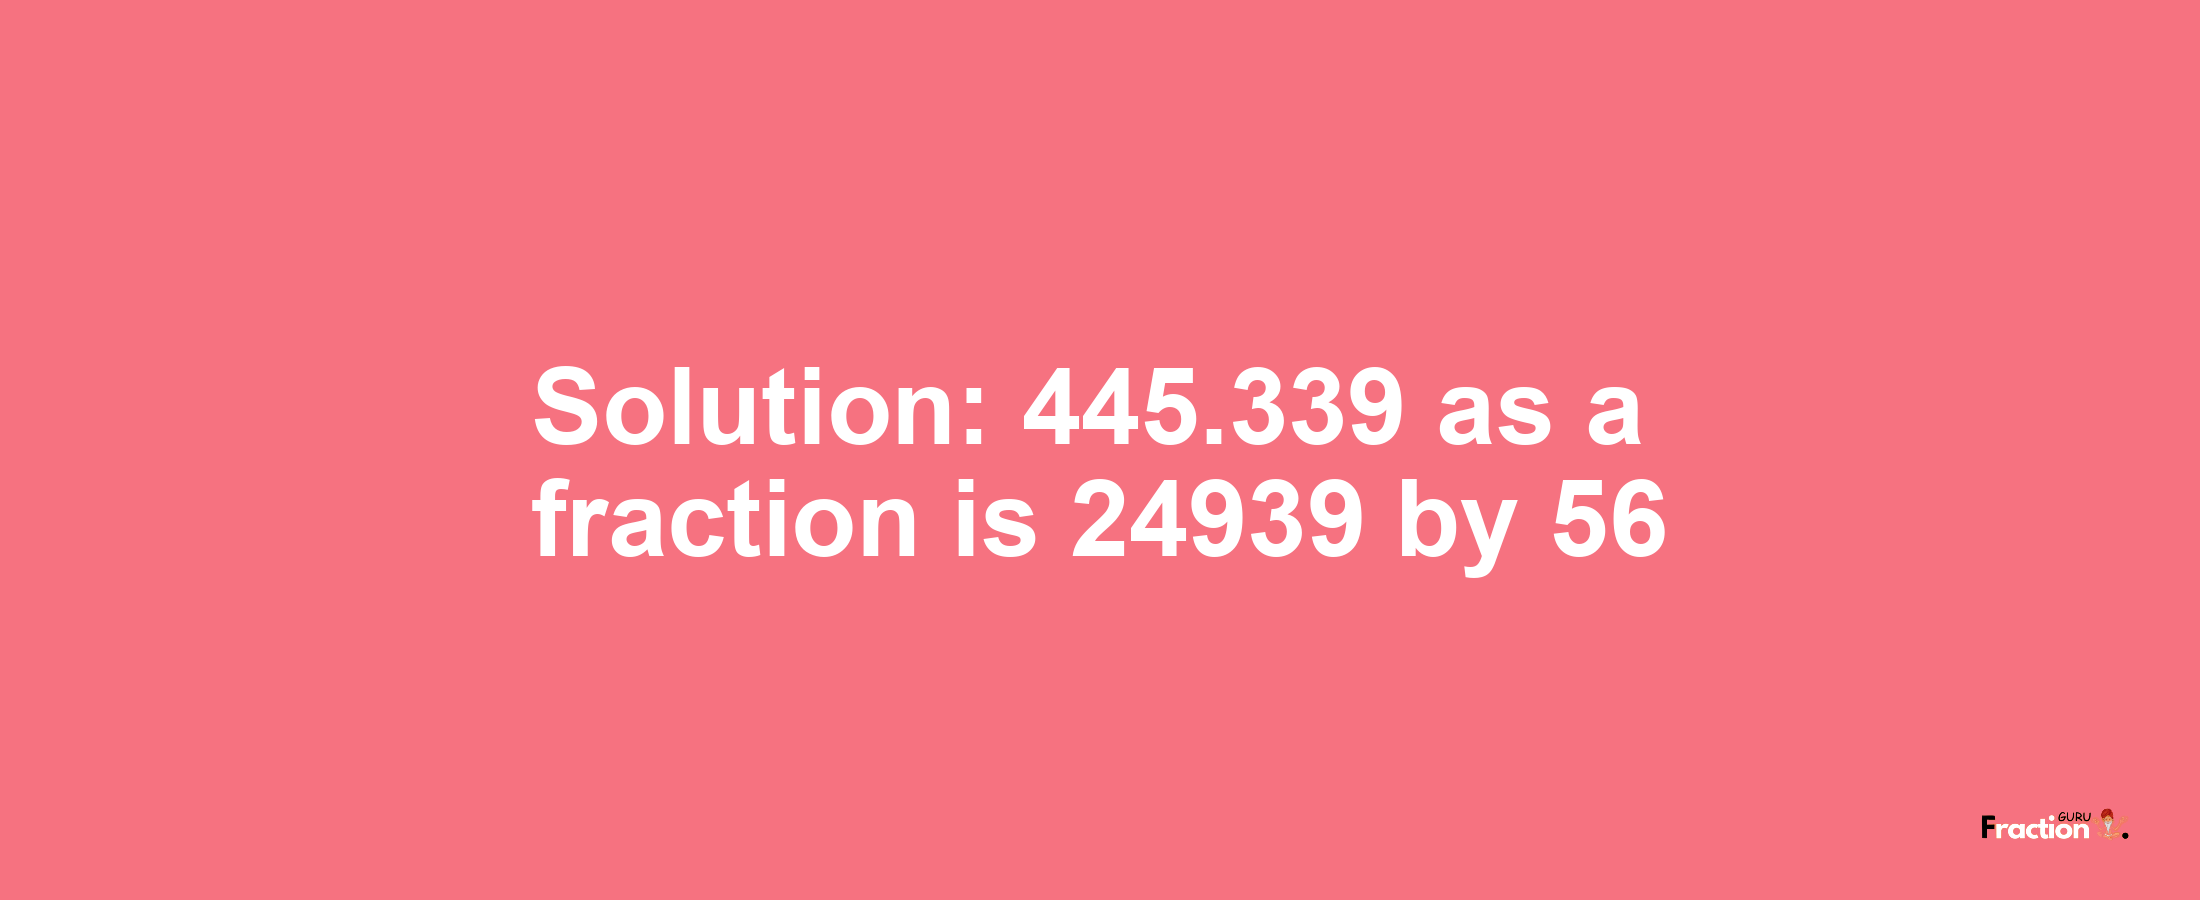 Solution:445.339 as a fraction is 24939/56